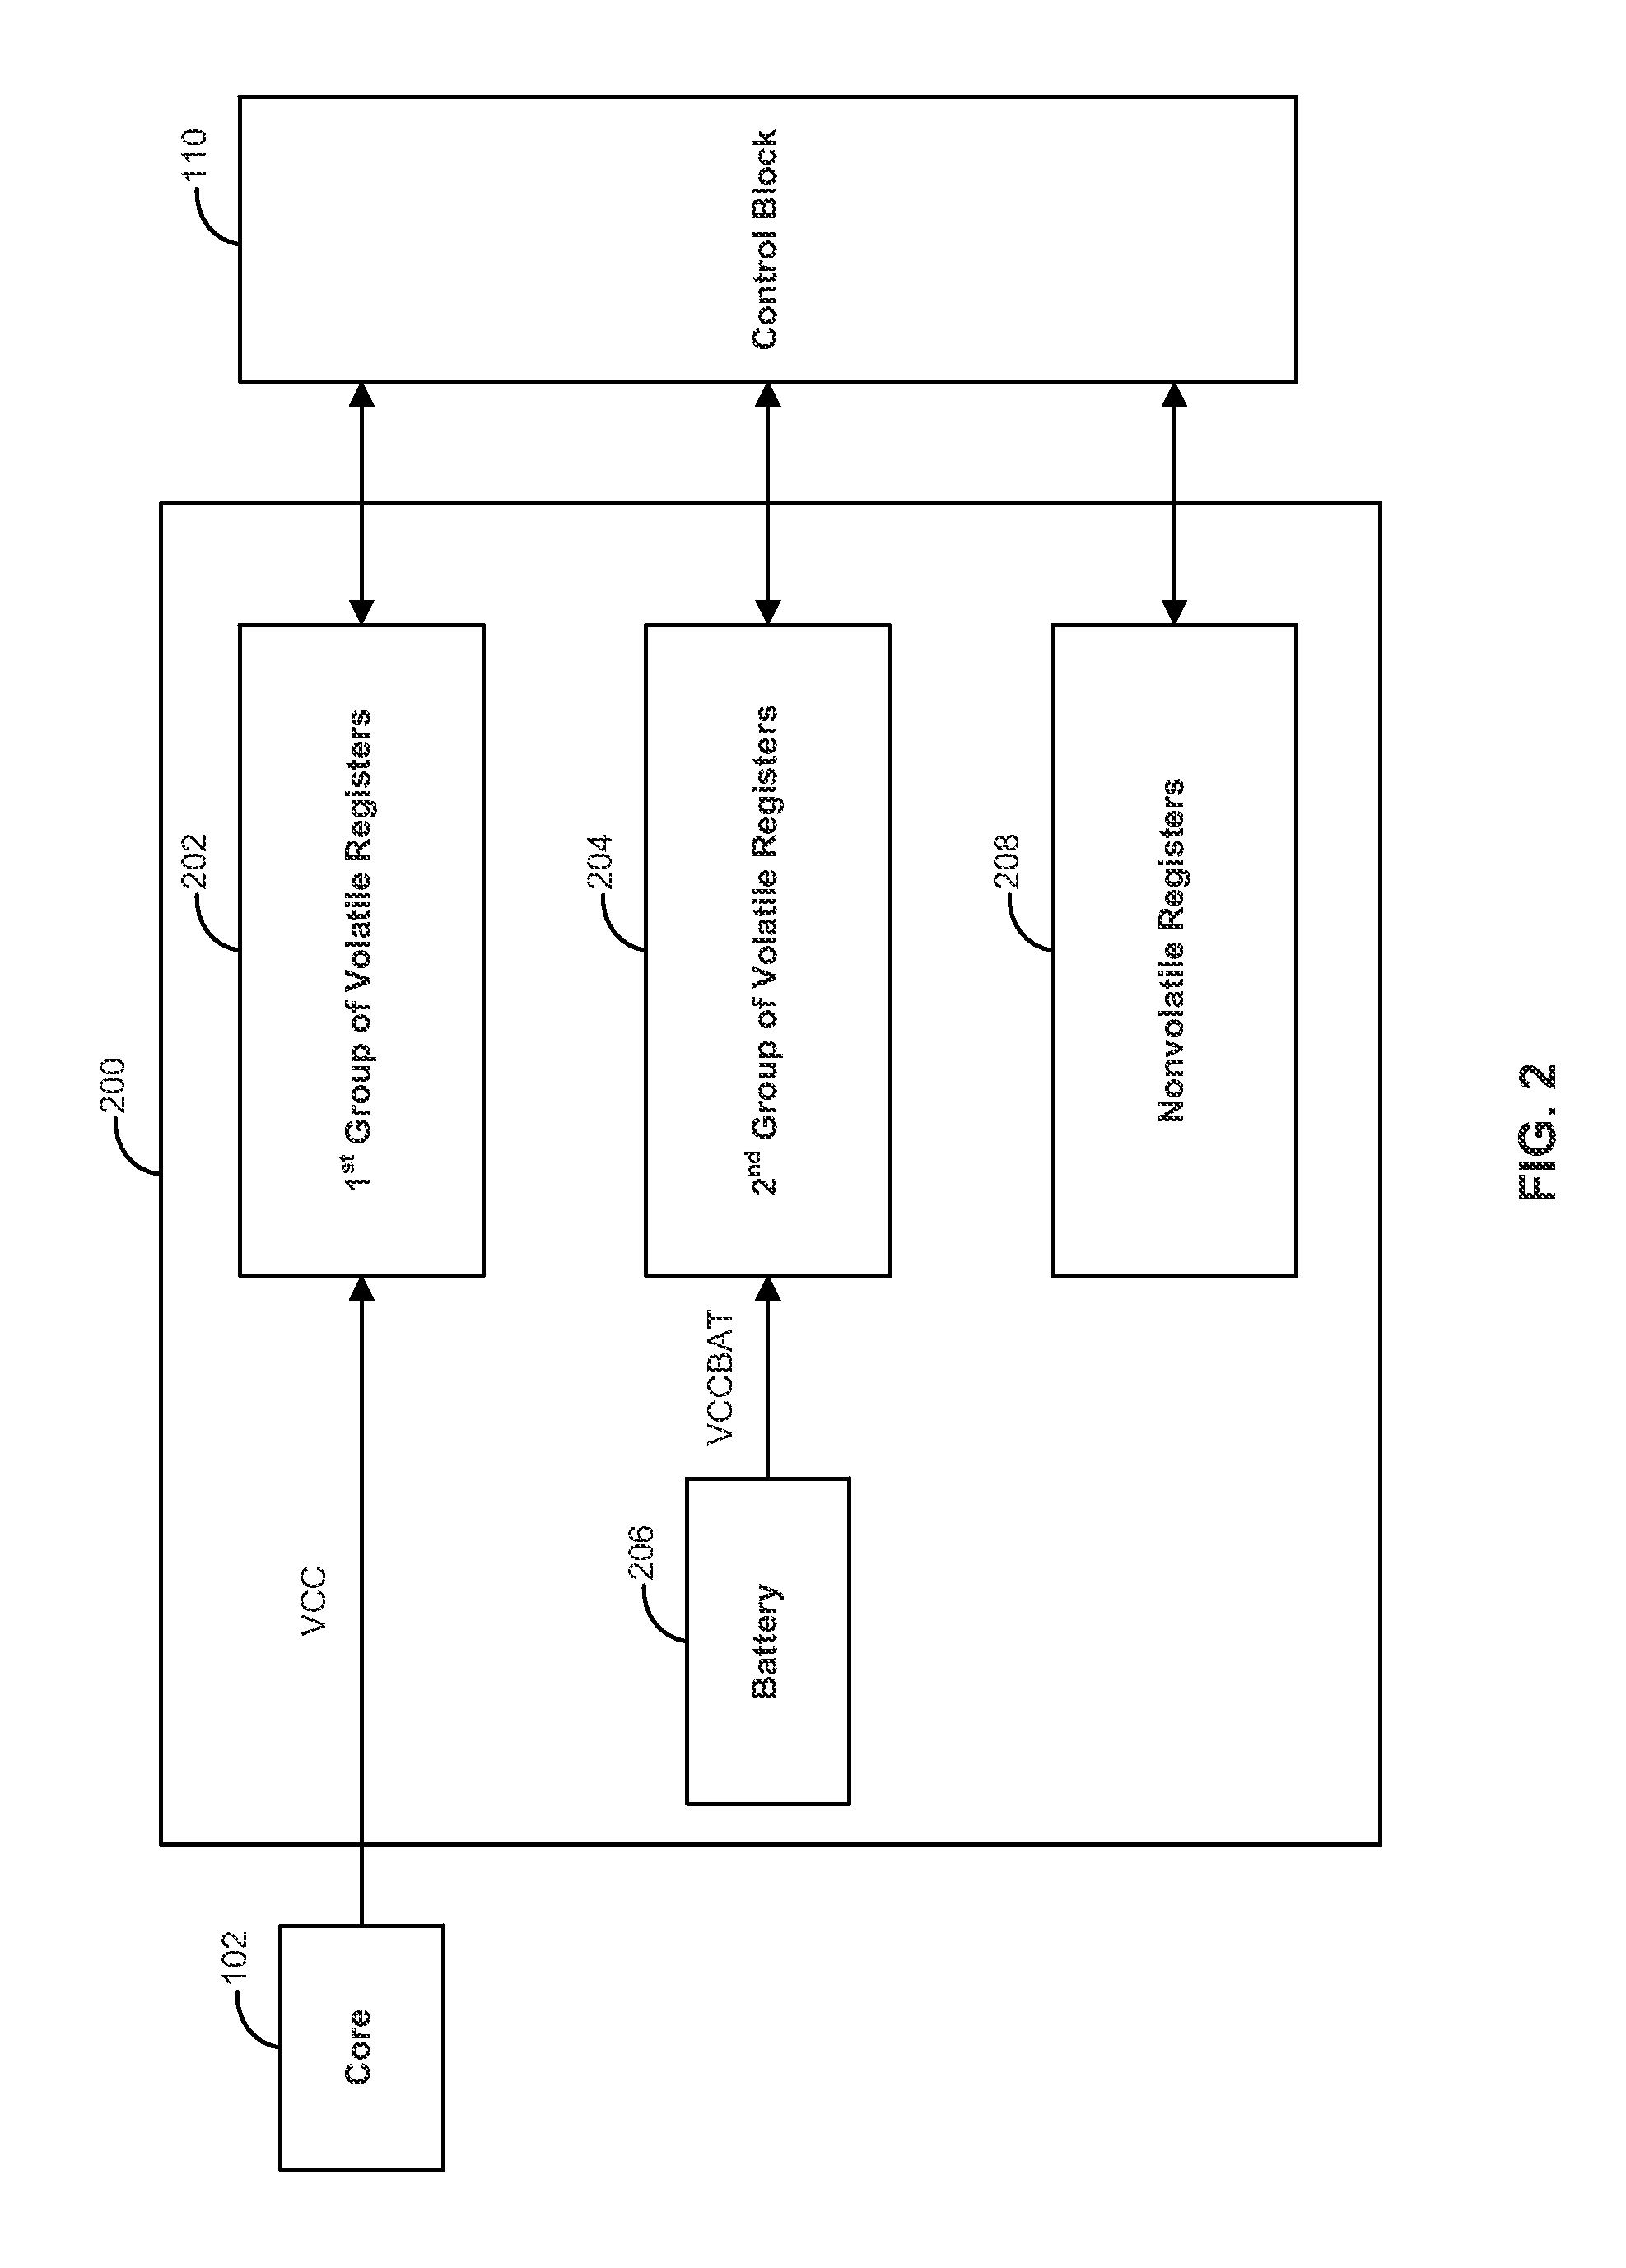 Systems and methods for detecting and mitigating programmable logic device tampering